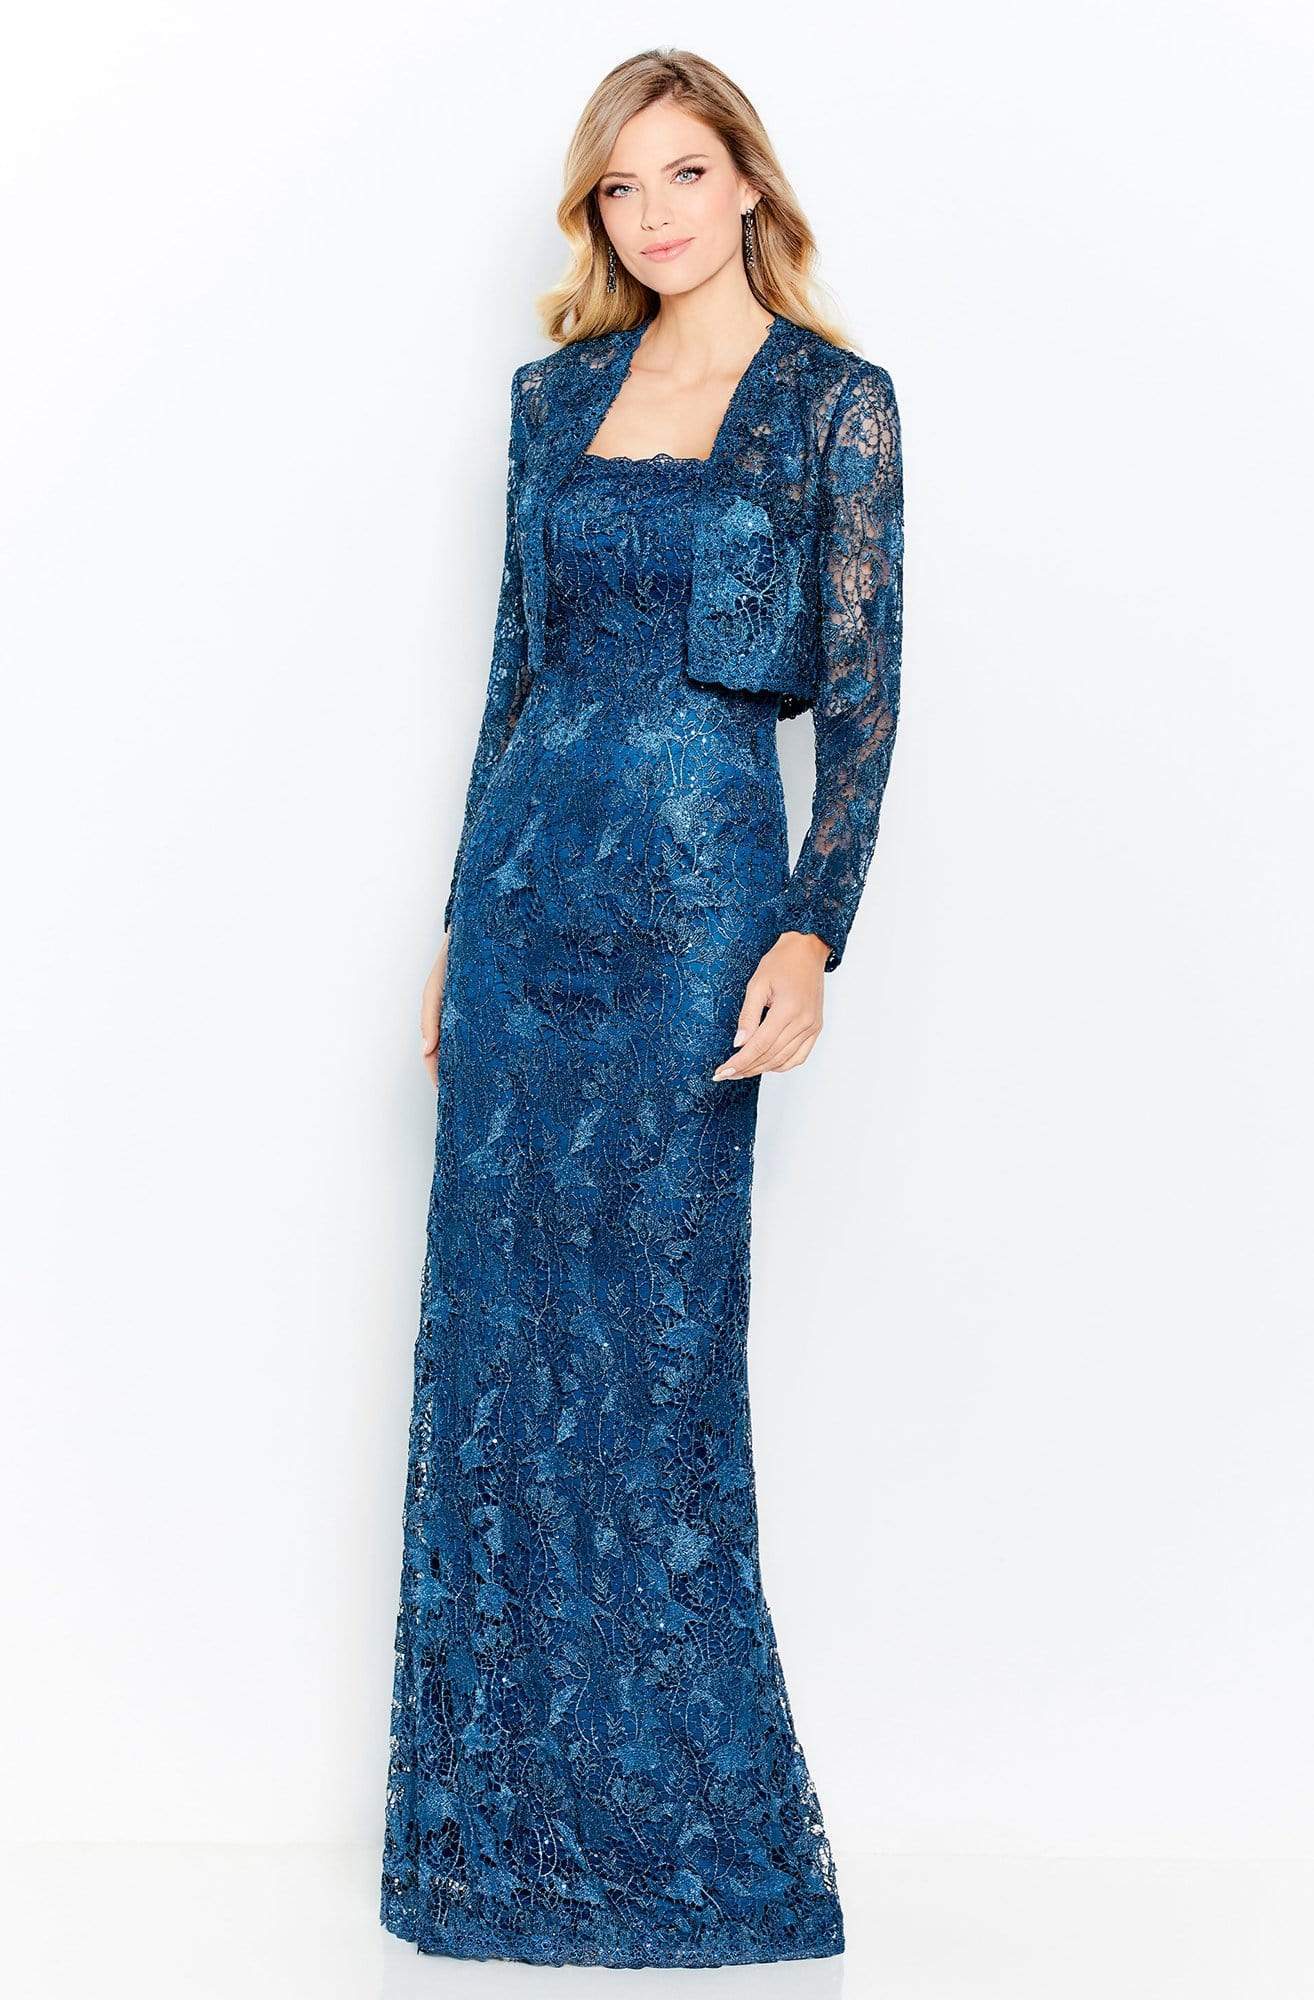 Cameron Blake by Mon Cheri - 120602 Allover Lace Sheath Dress Mother of the Bride Dresses 4 / Dark Teal